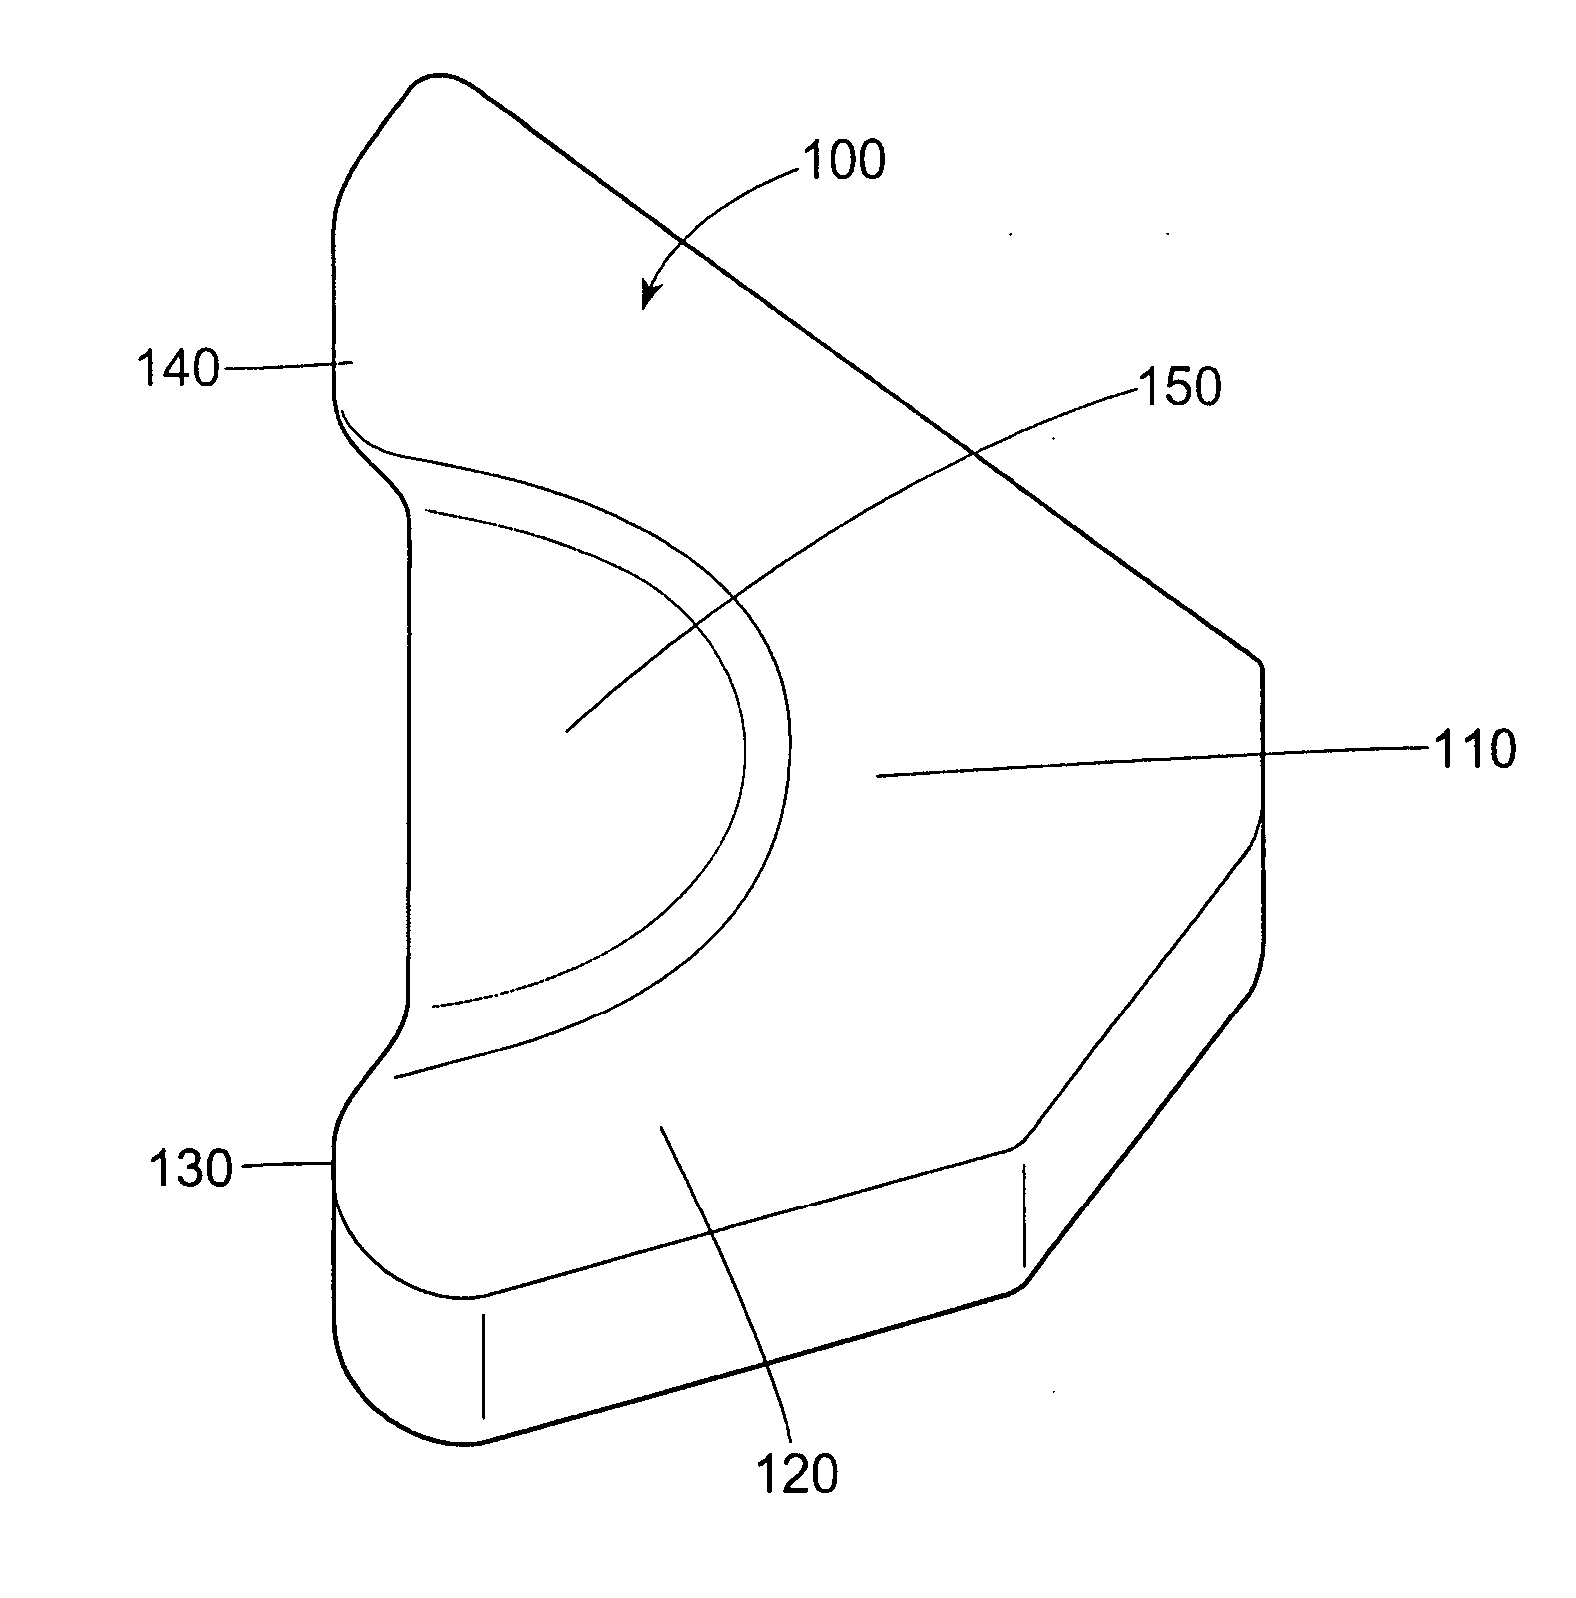 Method for alleviating or diverting pressure, treating or preventing the formation of sleep lines or decreasing their rate of formation, decreasing the rate of scar formation or facilitating the overall healing of a target area of a subjects's body